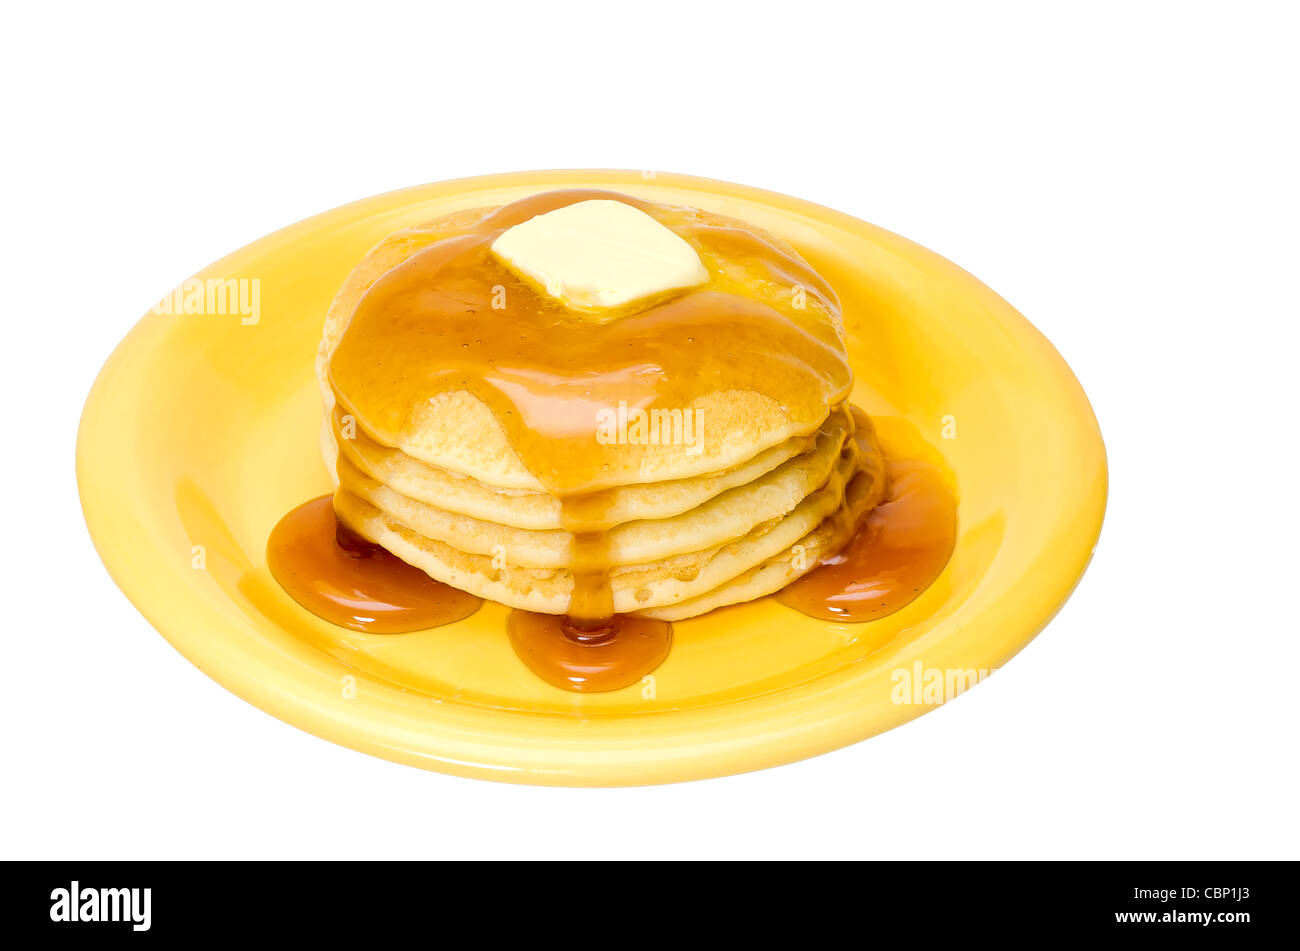 Stack of pancakes with maple syrup and butter on plate. Isolated on white background with clipping path. Stock Photo